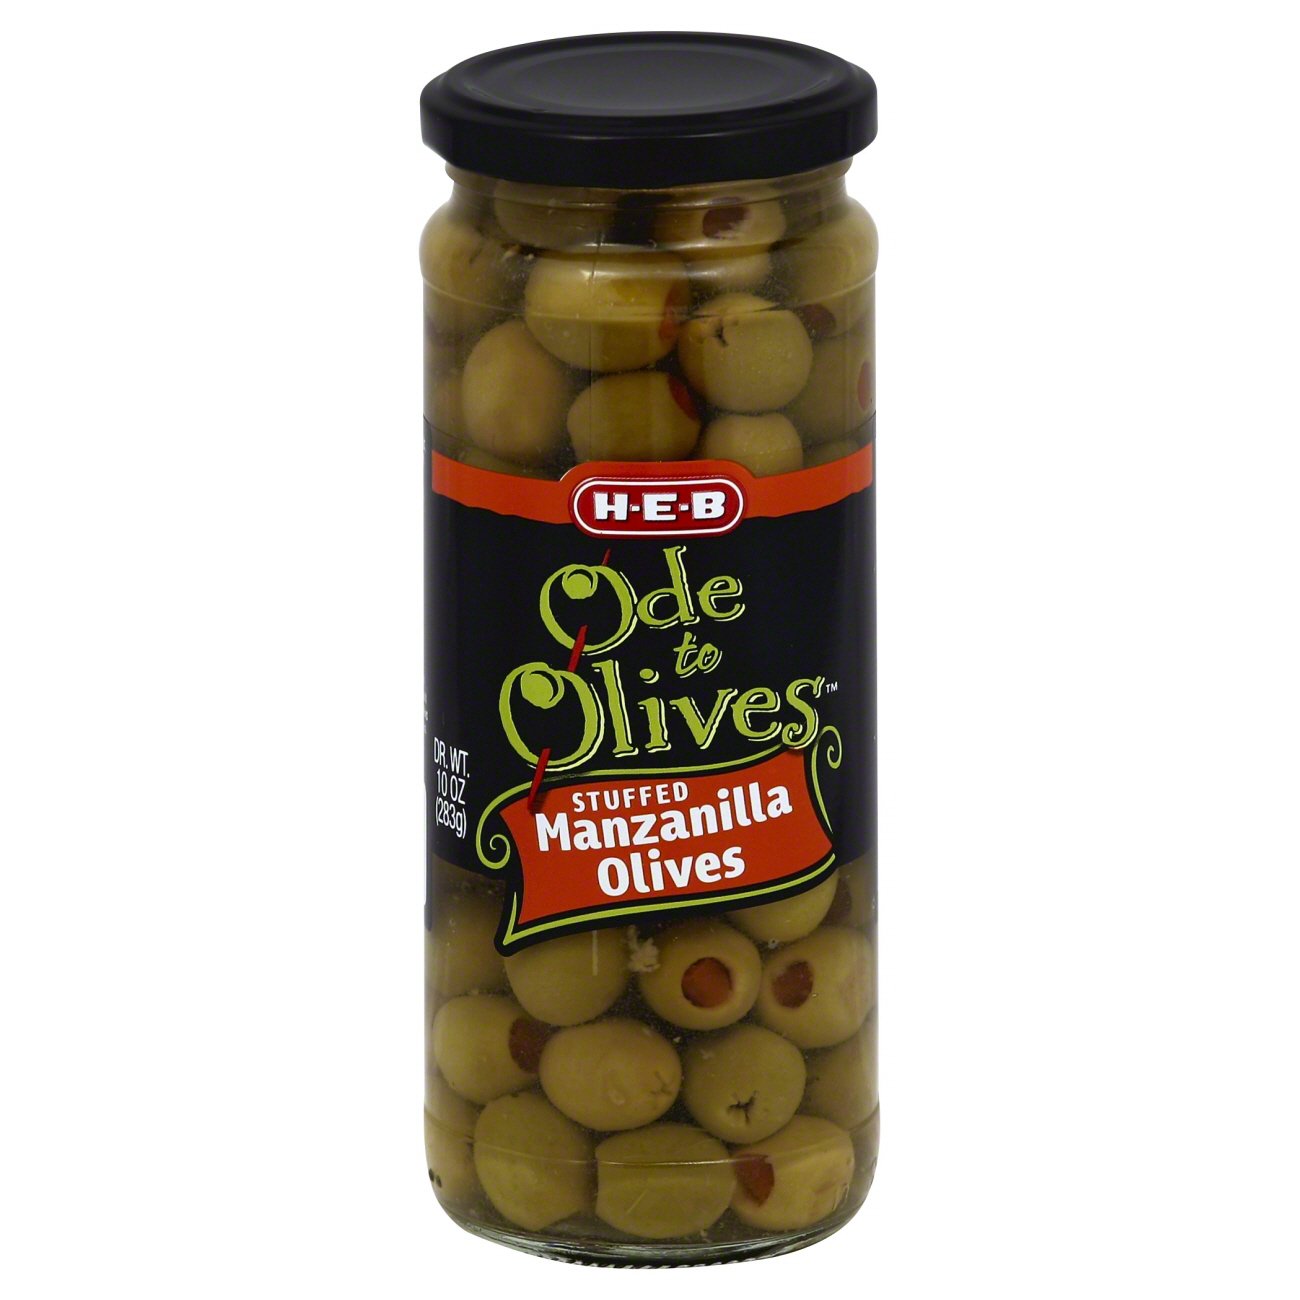 In the mood for Olives? 🫒 This Olive color is comes out so